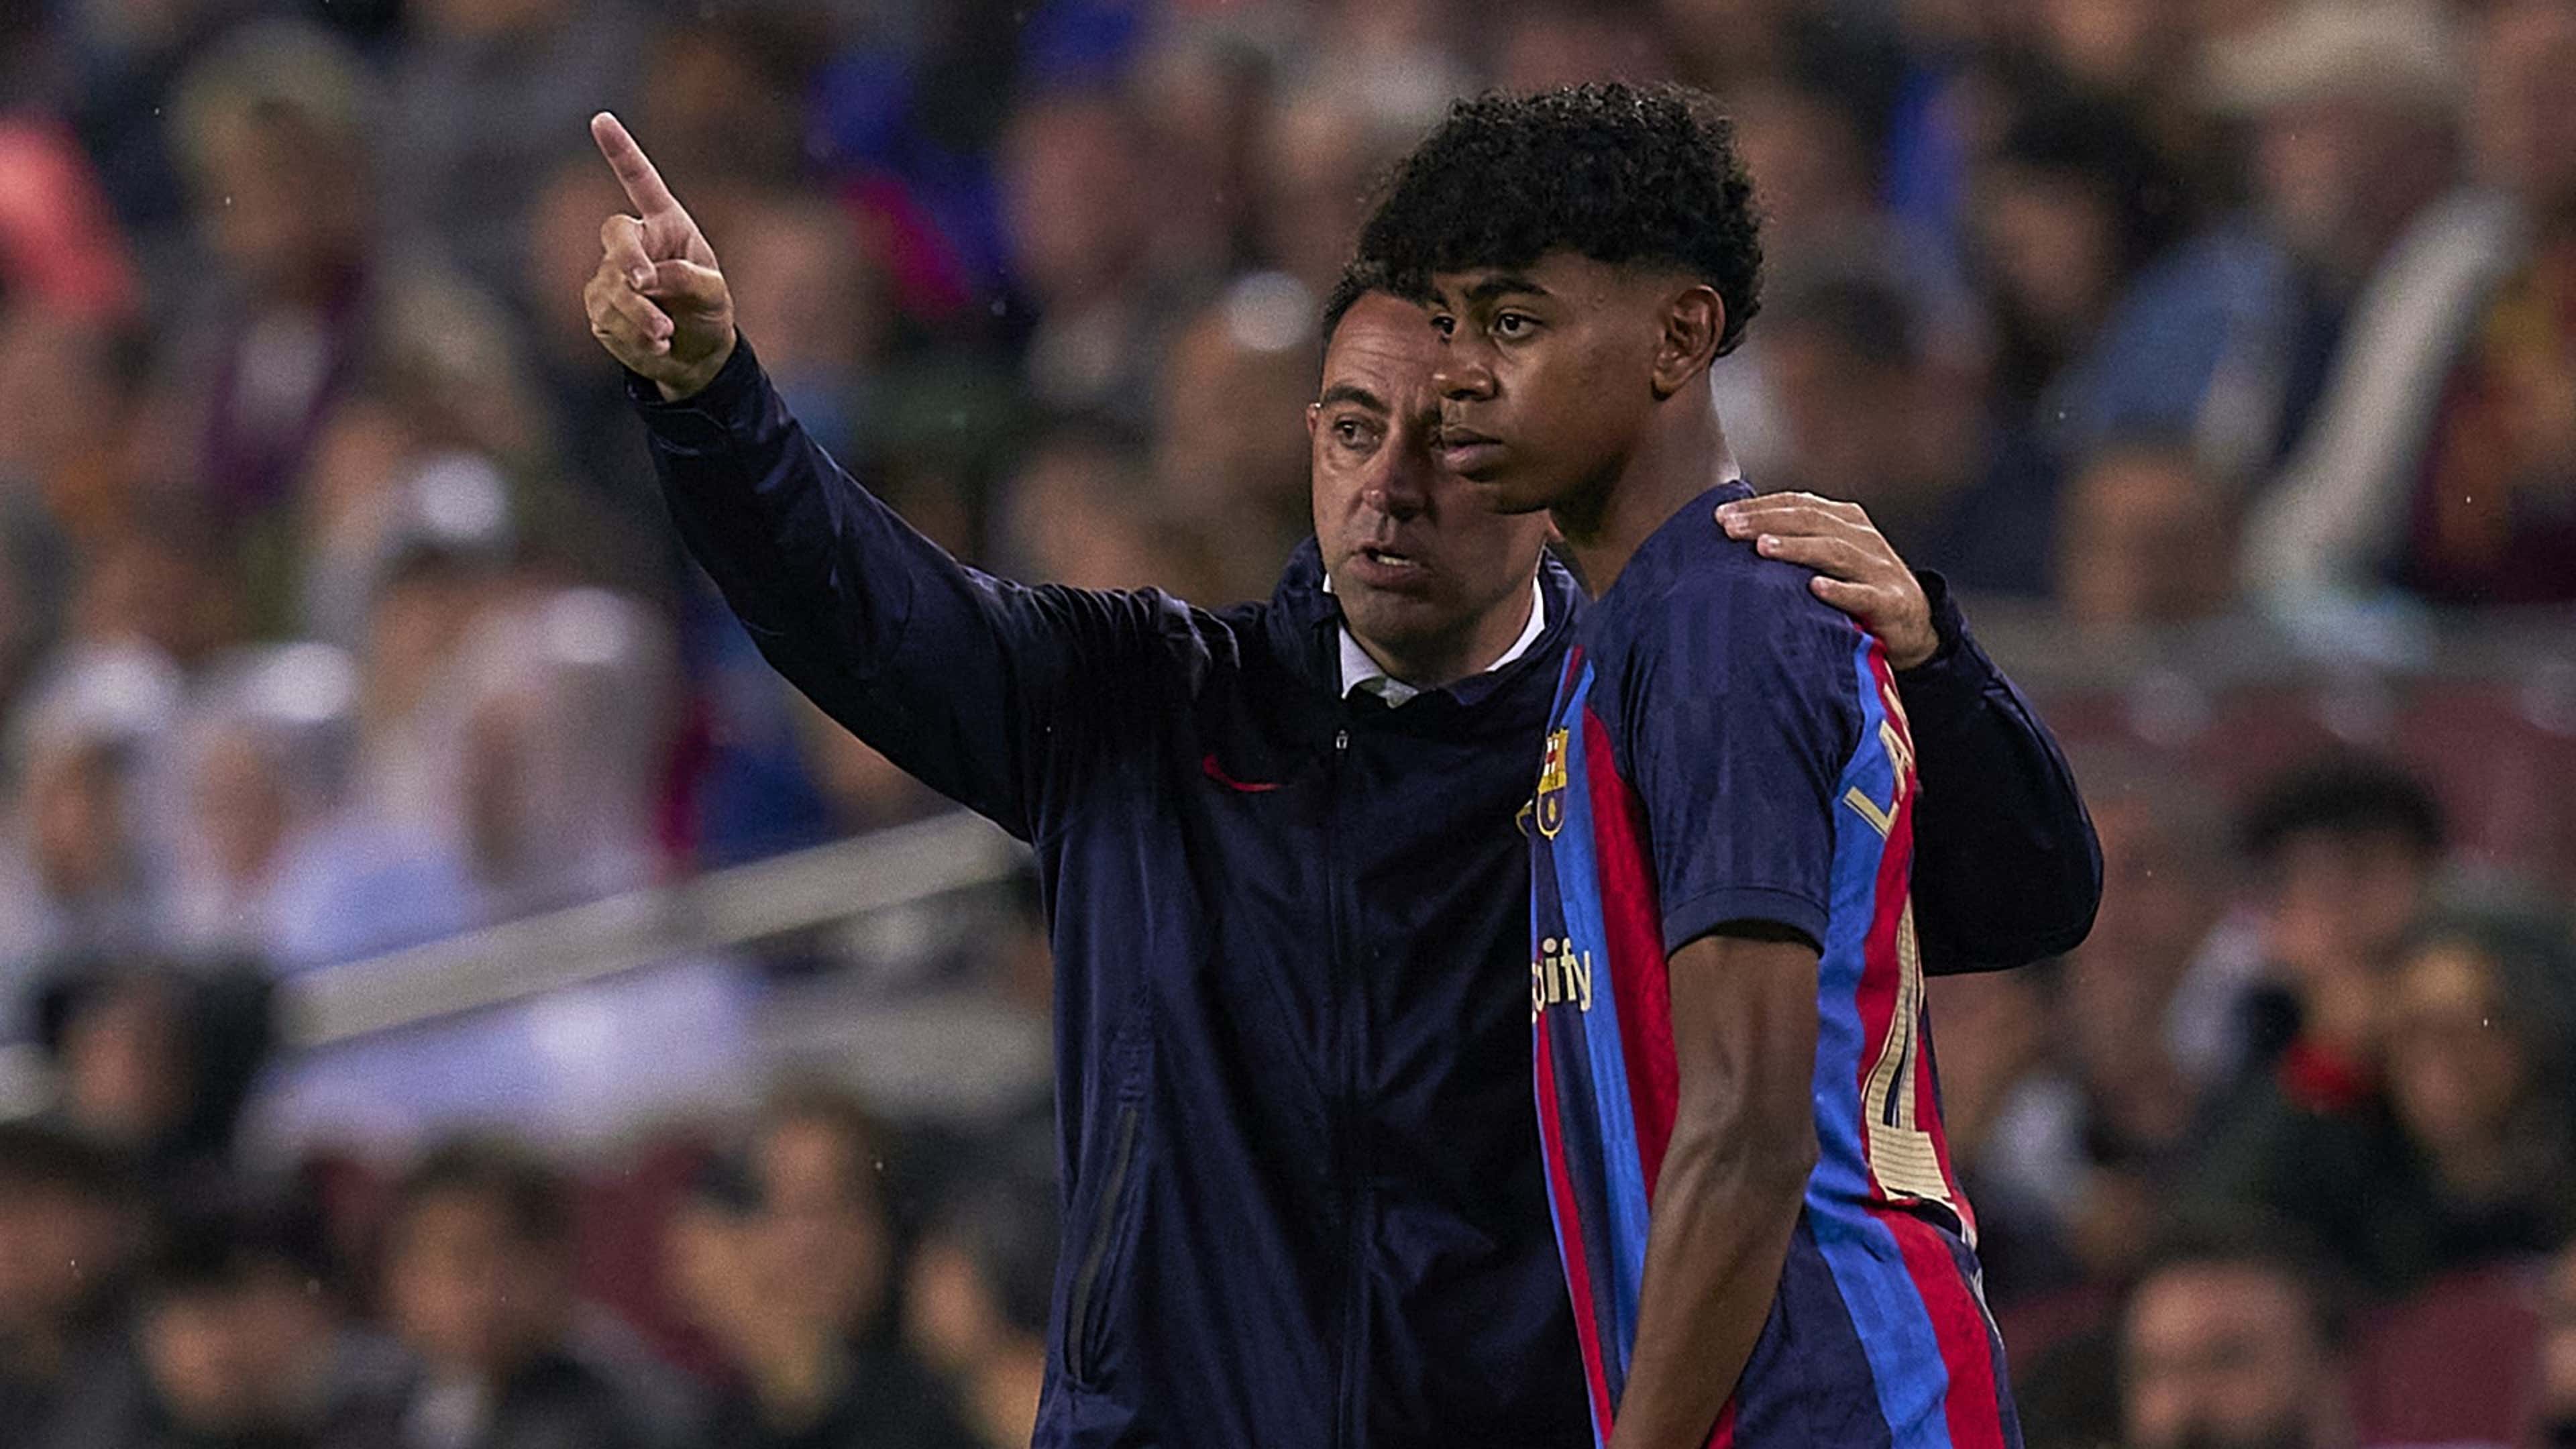 He is special' - Xavi compares Lamine Yamal to Lionel Messi after  15-year-old makes Barcelona debut | Goal.com